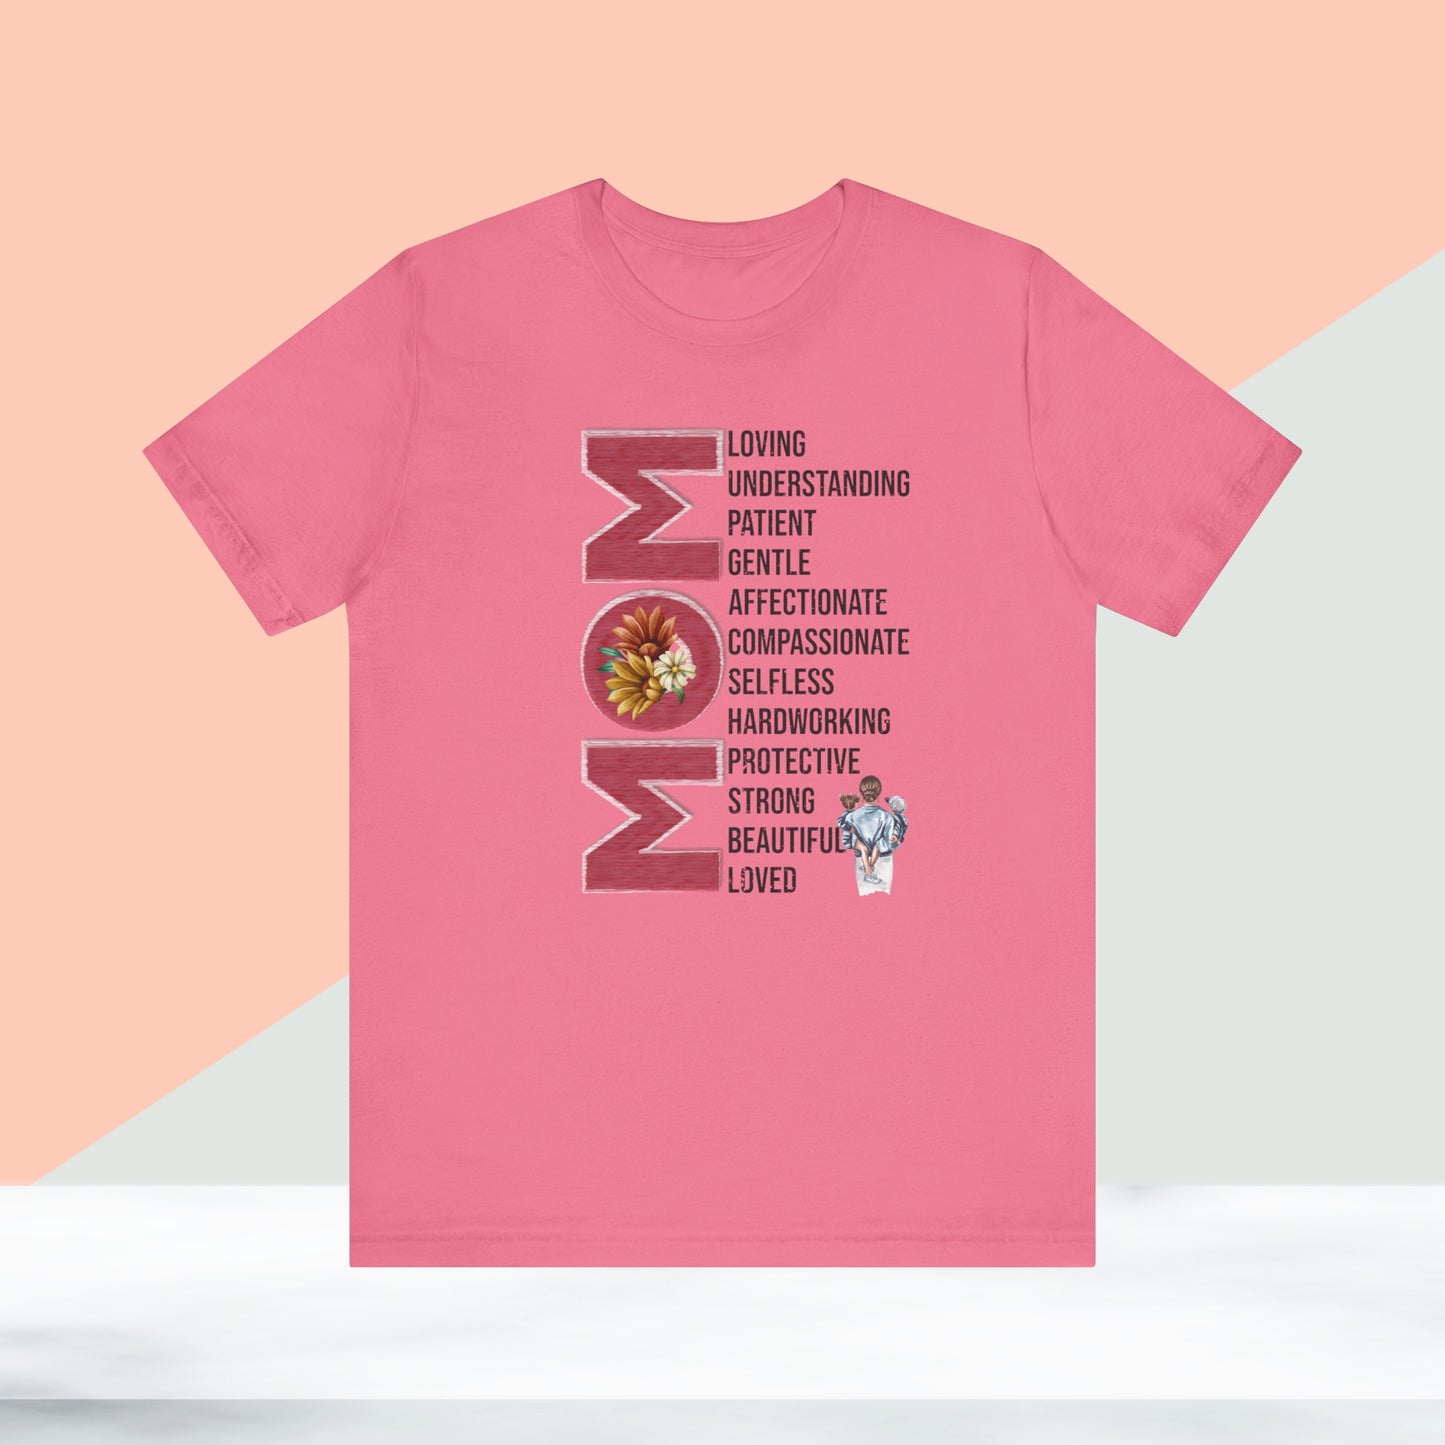 Happy Mother's Day T-shirt for Mom,  Mom Shirt, Gift for moms, Mama Shirts